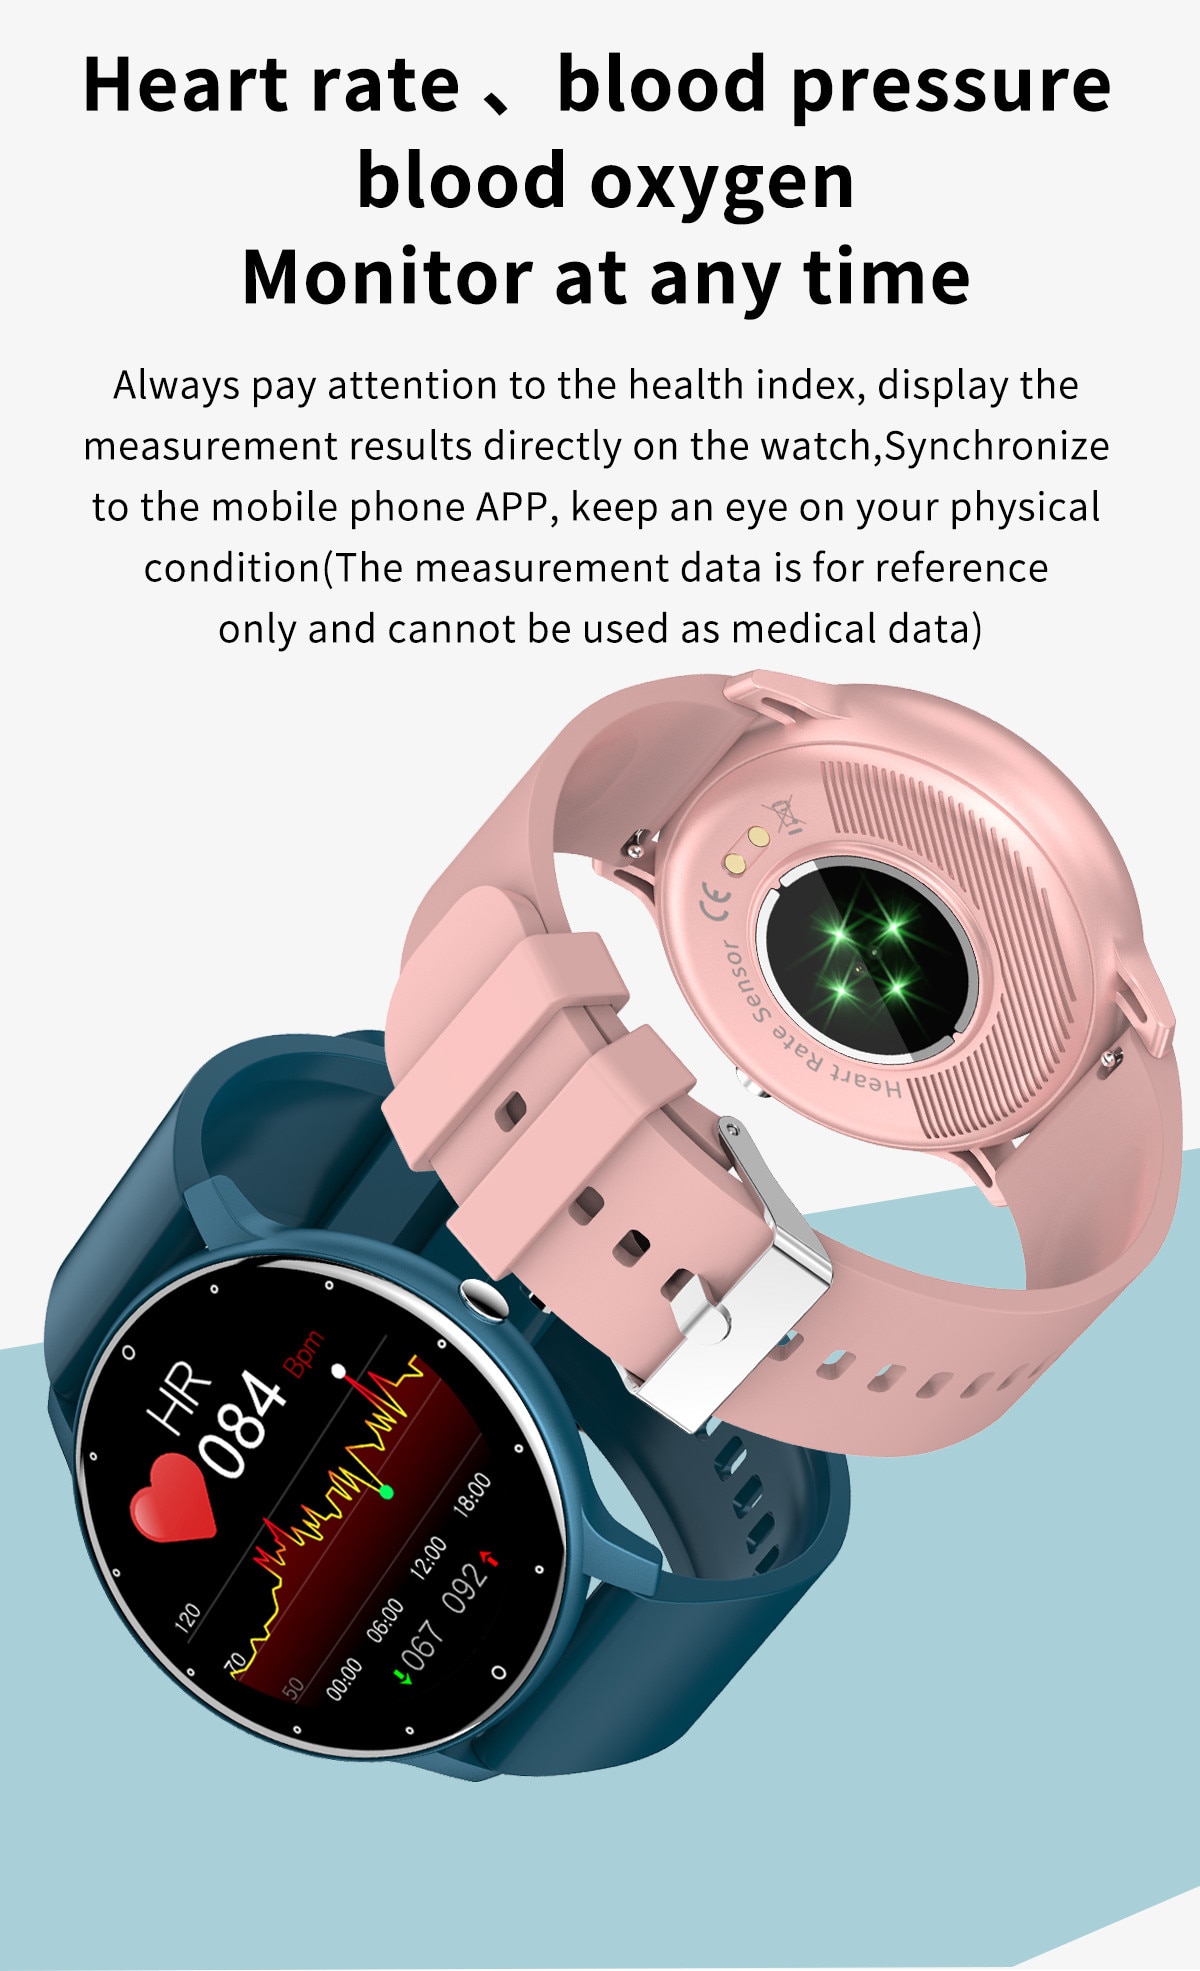 LIGE 2022 New Men Smart Watch Real-time Activity Tracker Heart Rate Monitor Sports Women Smart Watch Men Clock For Android IOS